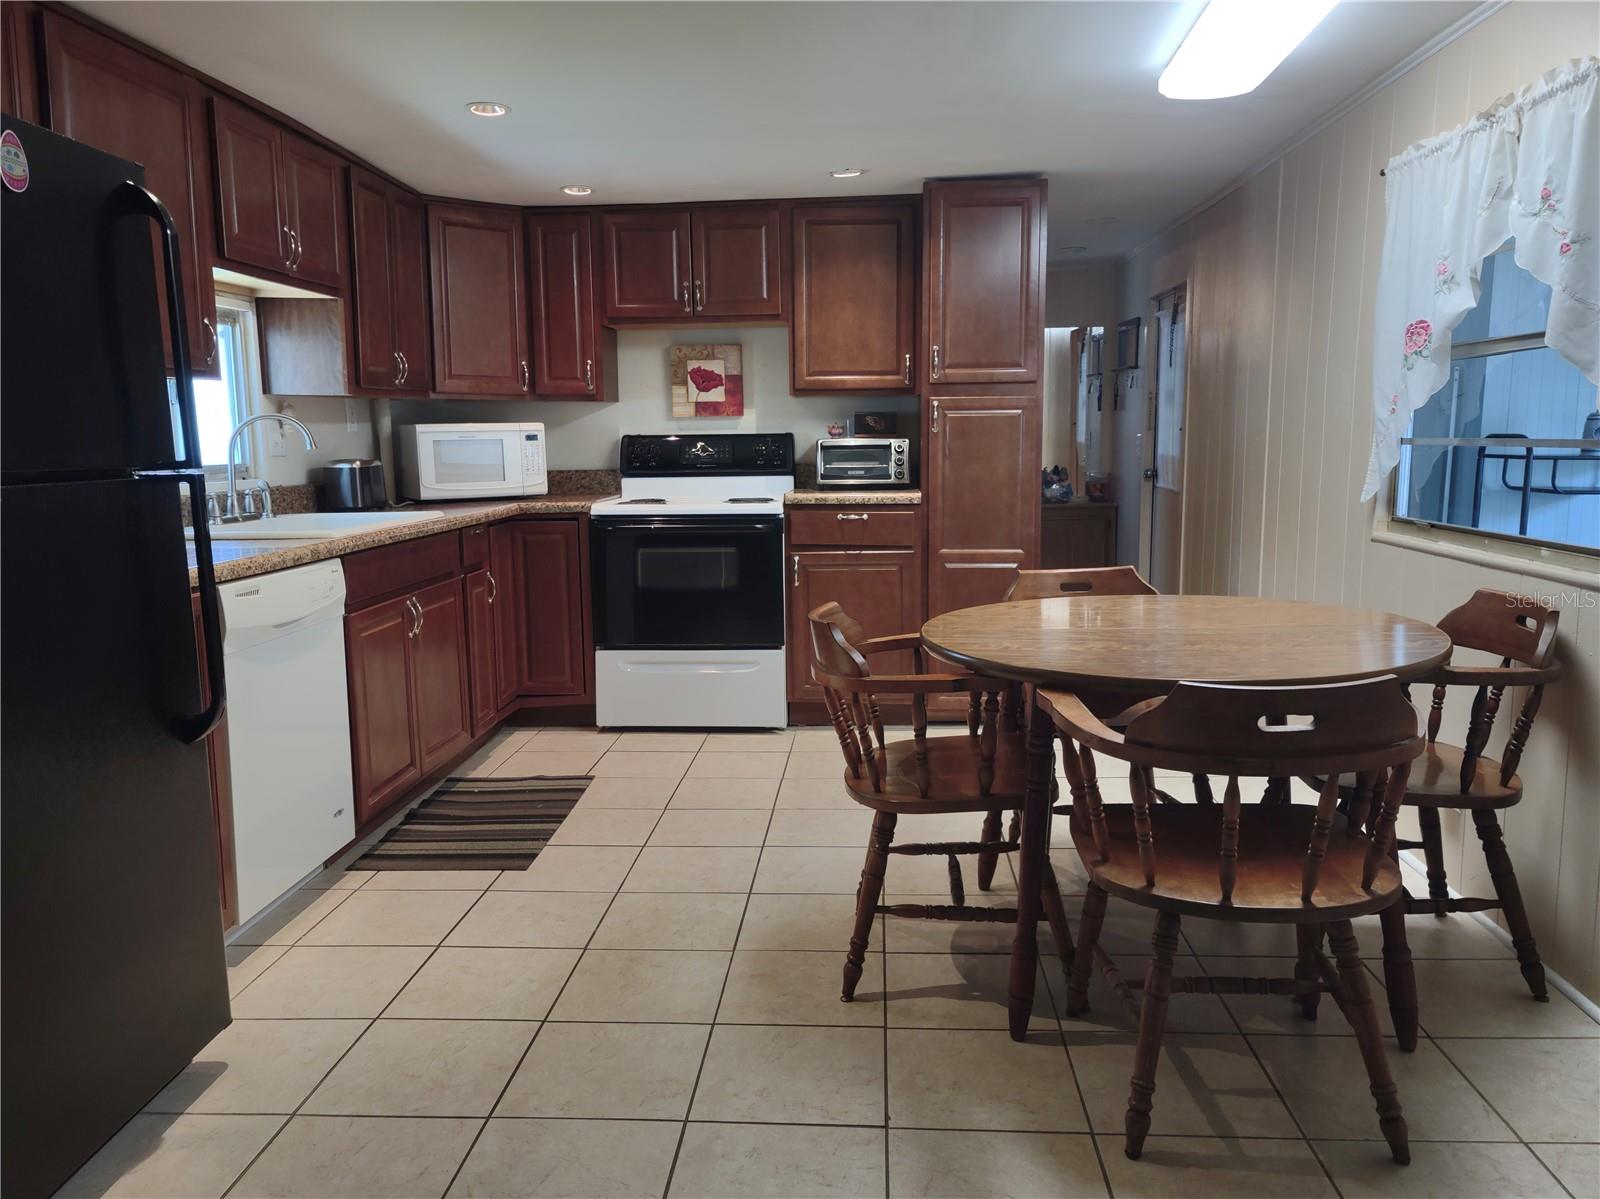 Eat in kitchen features tile flooring, rich chestnut cabinetry, granite looking countertops, inset can lighting, updated appliances (refrigerator, dishwasher, range, countertop microwave) and a pantry.